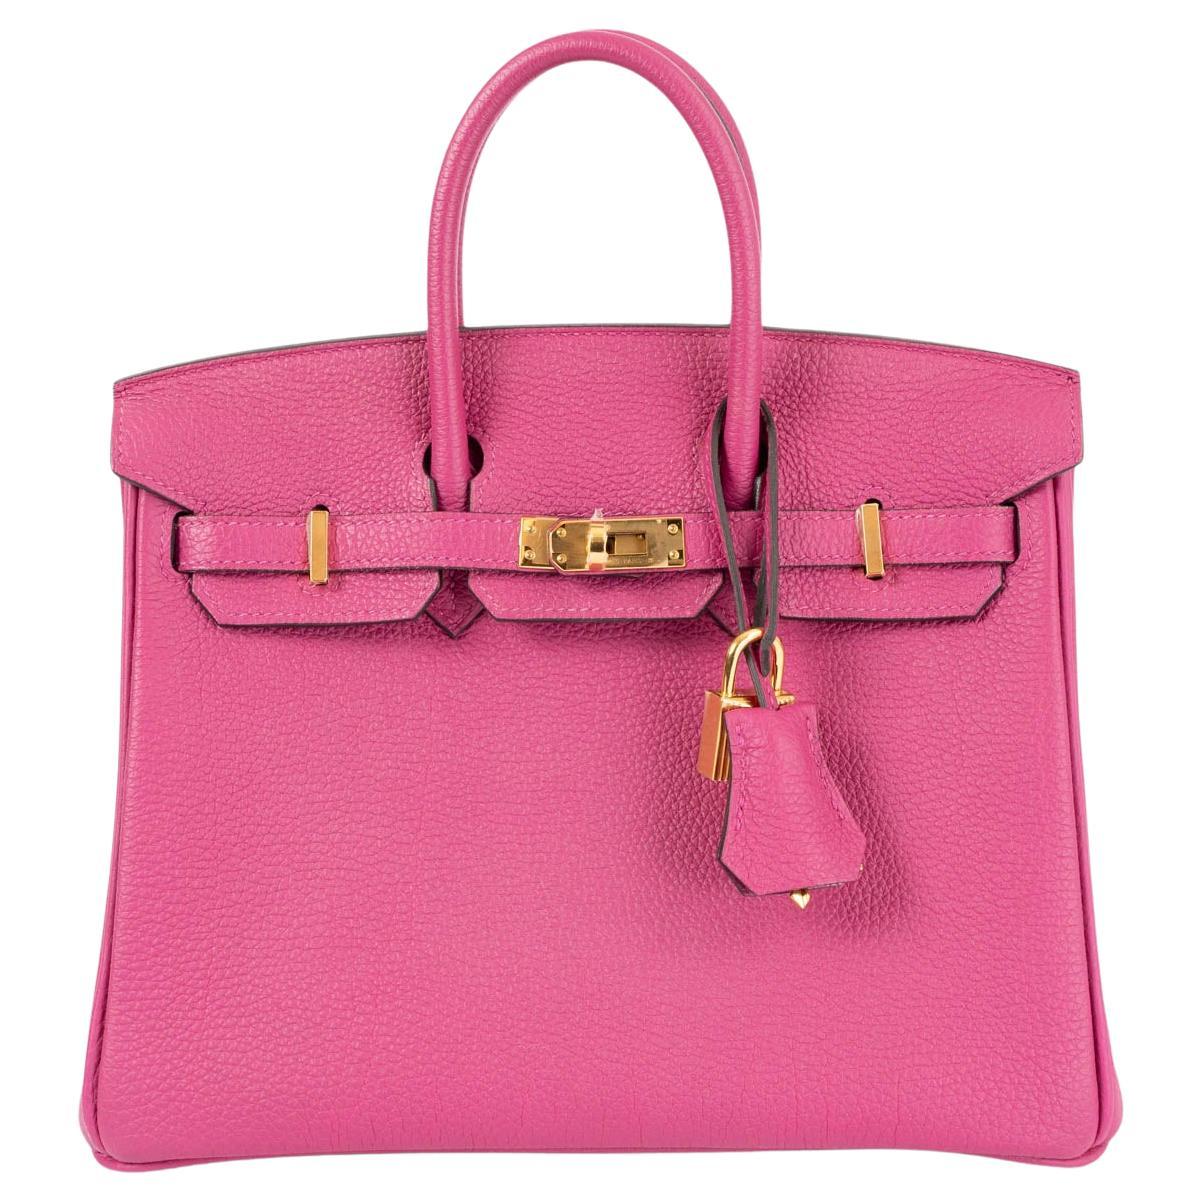 100% authentic Hermès Birkin 25 bag in Rose Pourpre (pink) Veau Togo leather with gold-plated hardware. Lined in Chevre (goat skin) with an open pocket against the front and zipper pocket against the back. Has been carried and is in virtually new